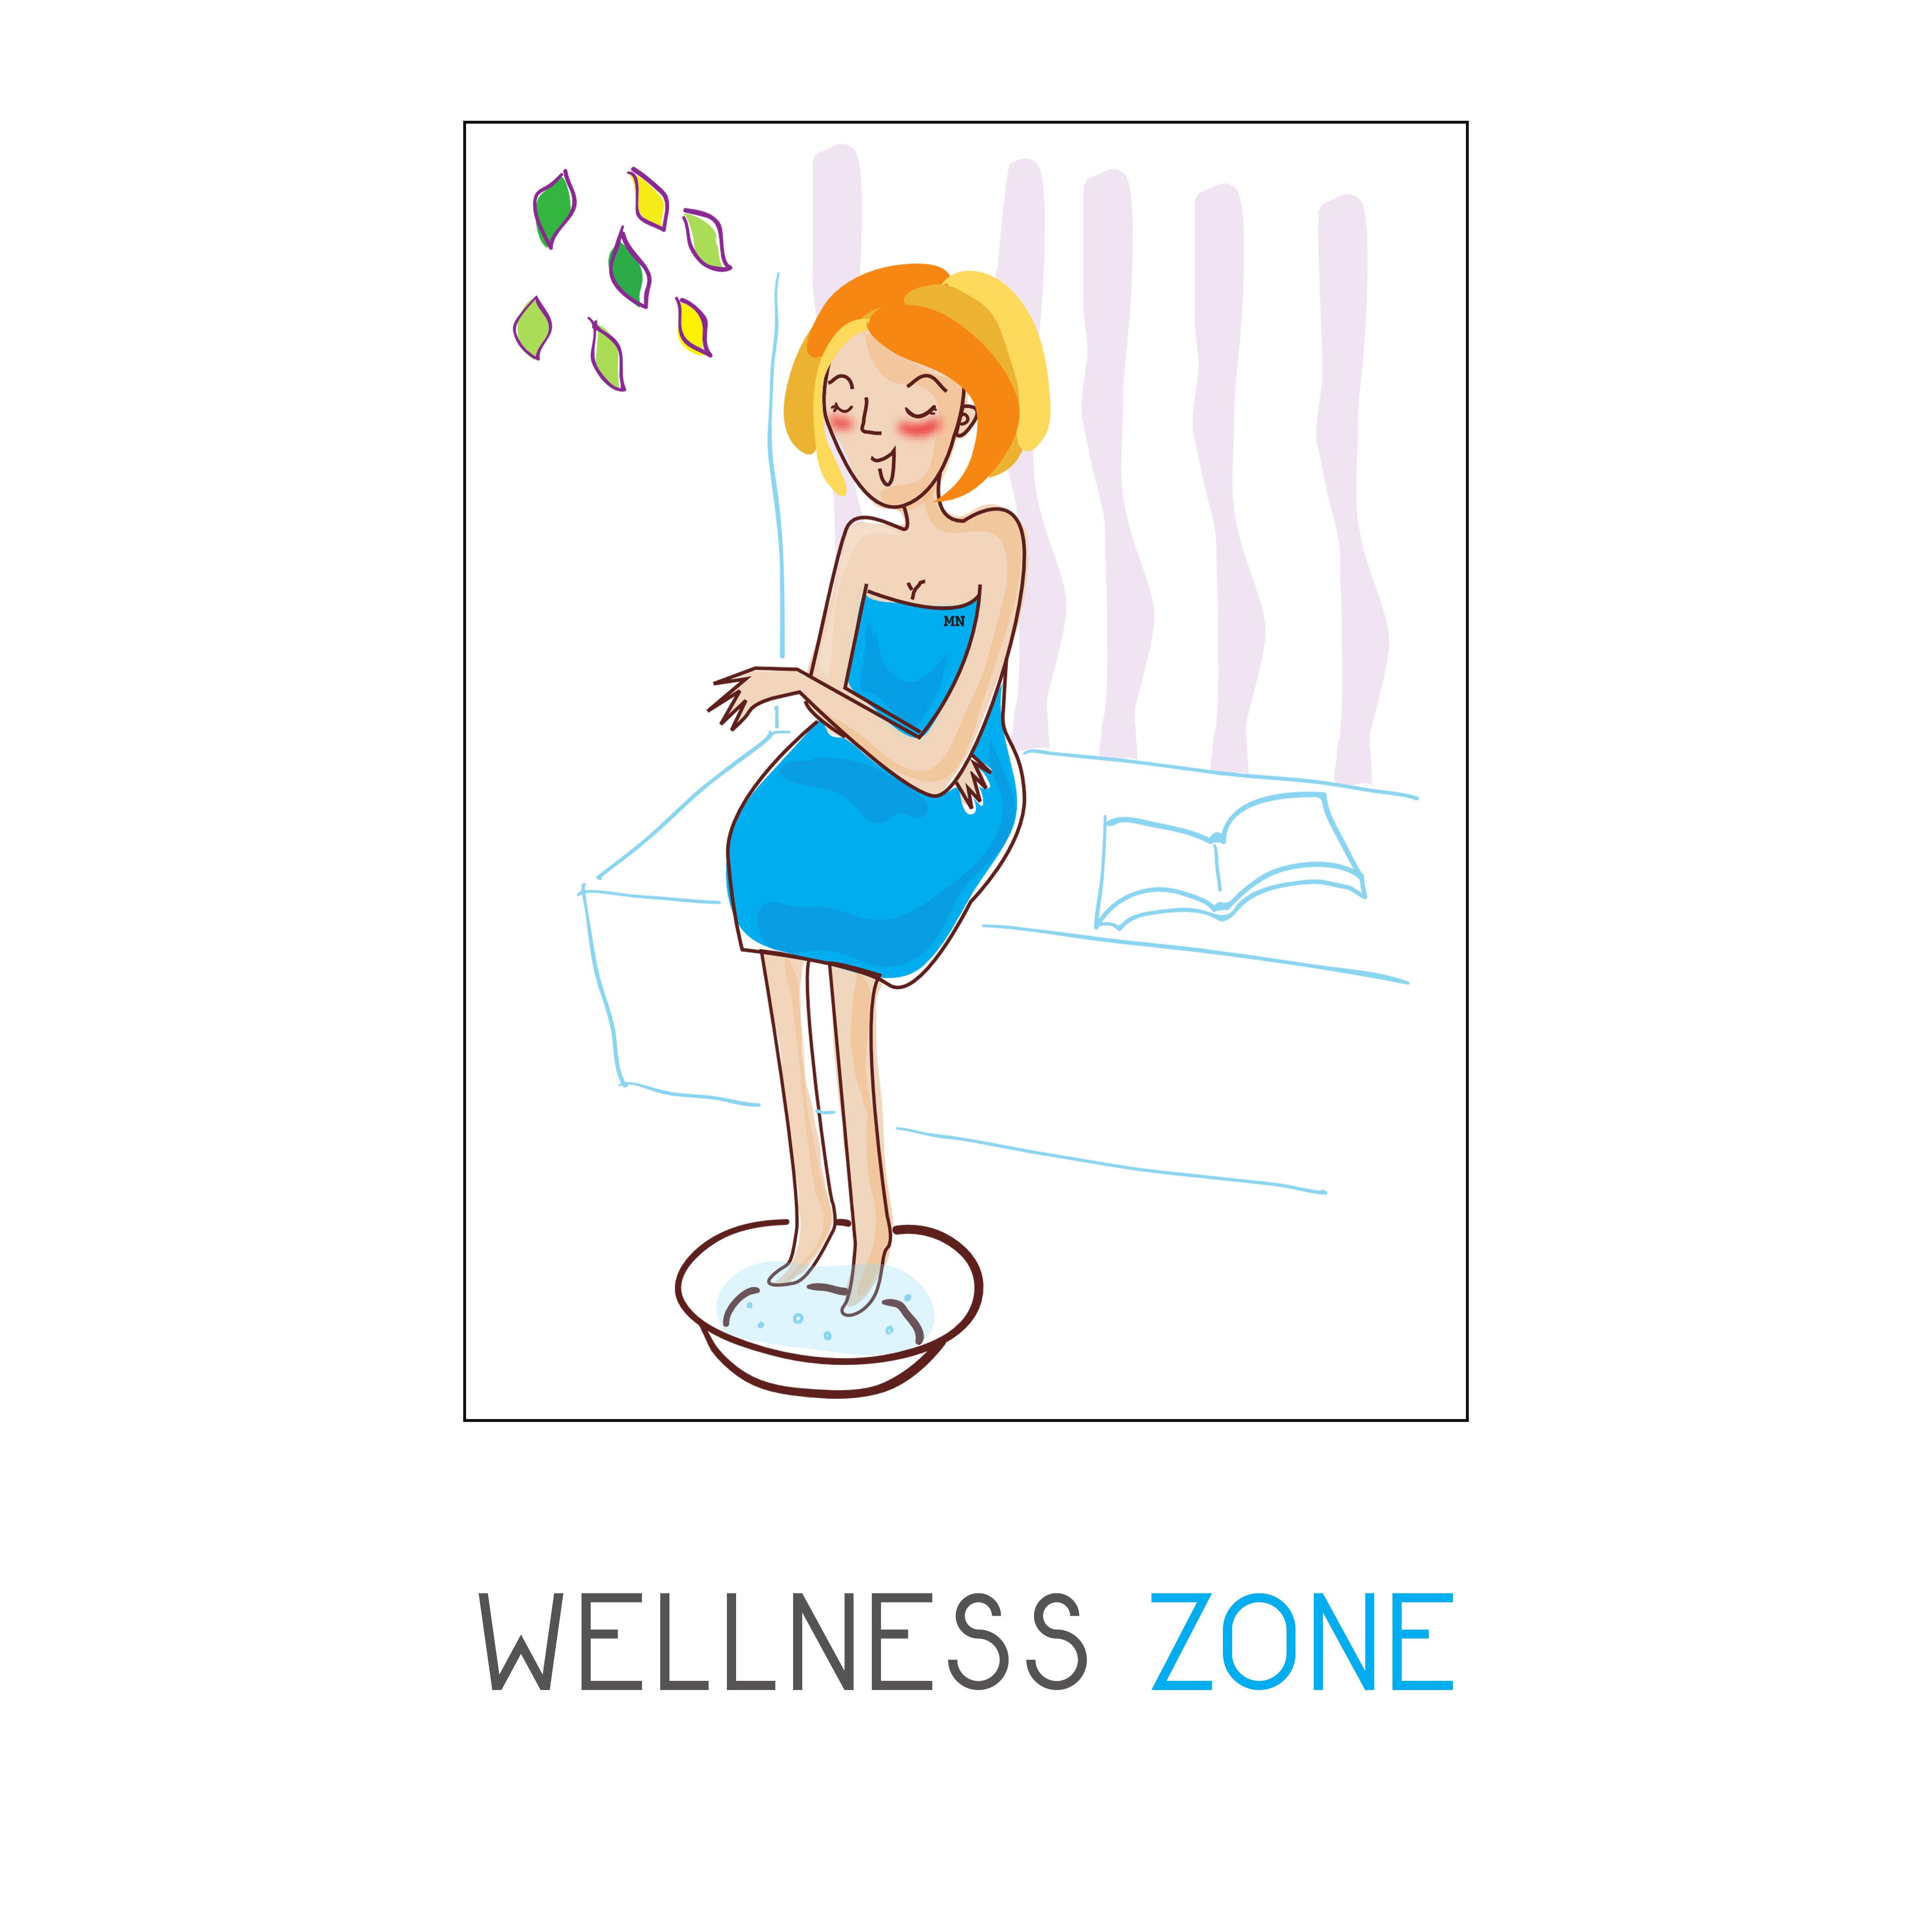 Wellness Zone  Healing Sounds of Nature to Massage, Pure Relaxation, Deep Meditation Spa, New Age